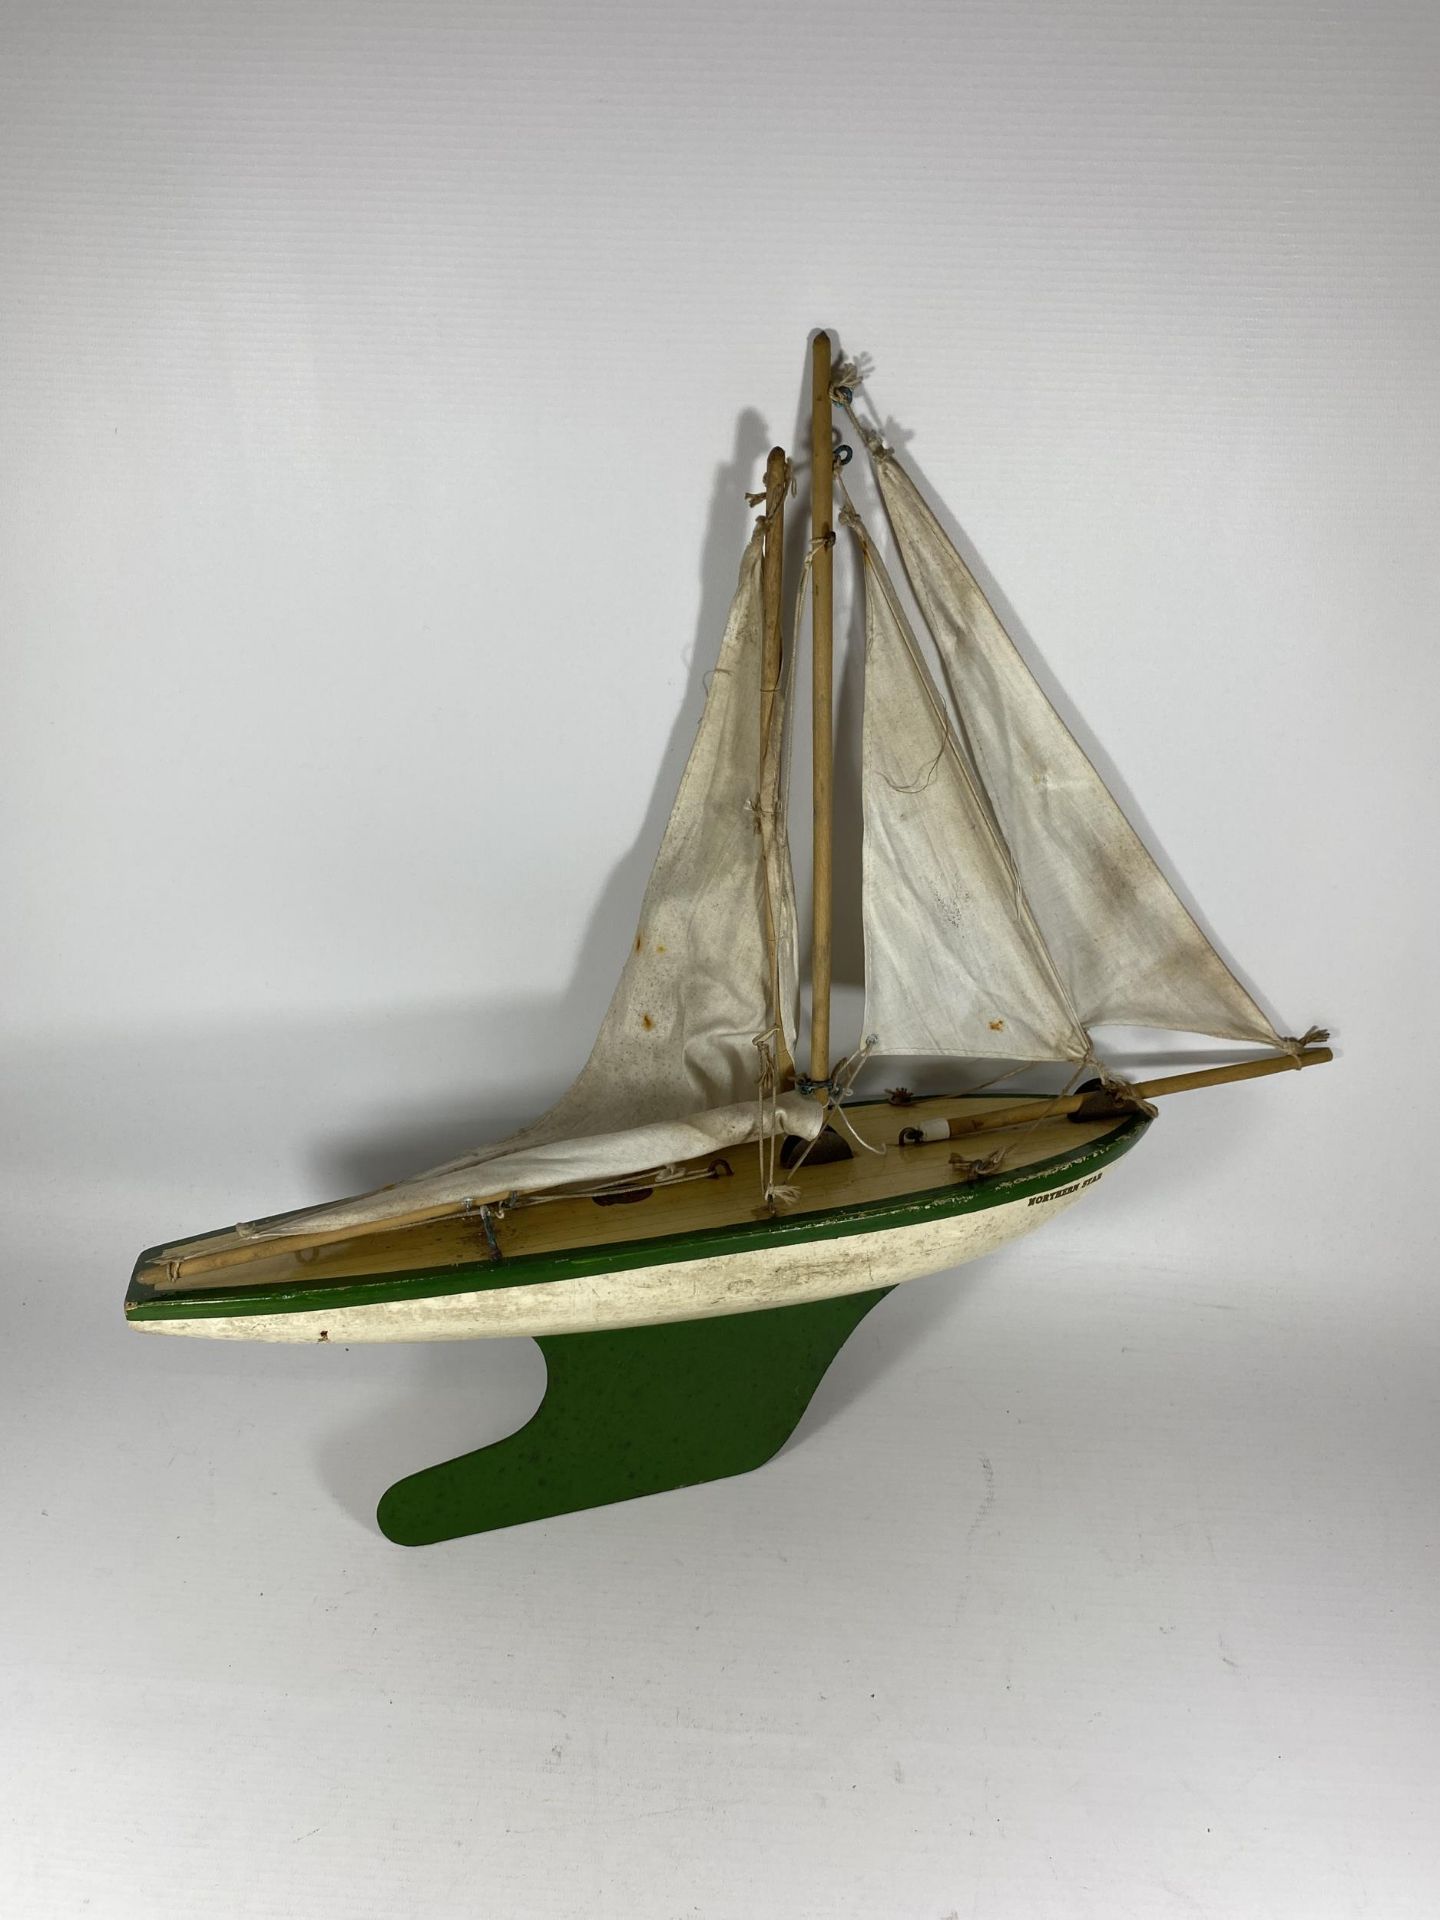 A VINTAGE 'STAR YACHT' SAILING BOAT MODEL - Image 4 of 5